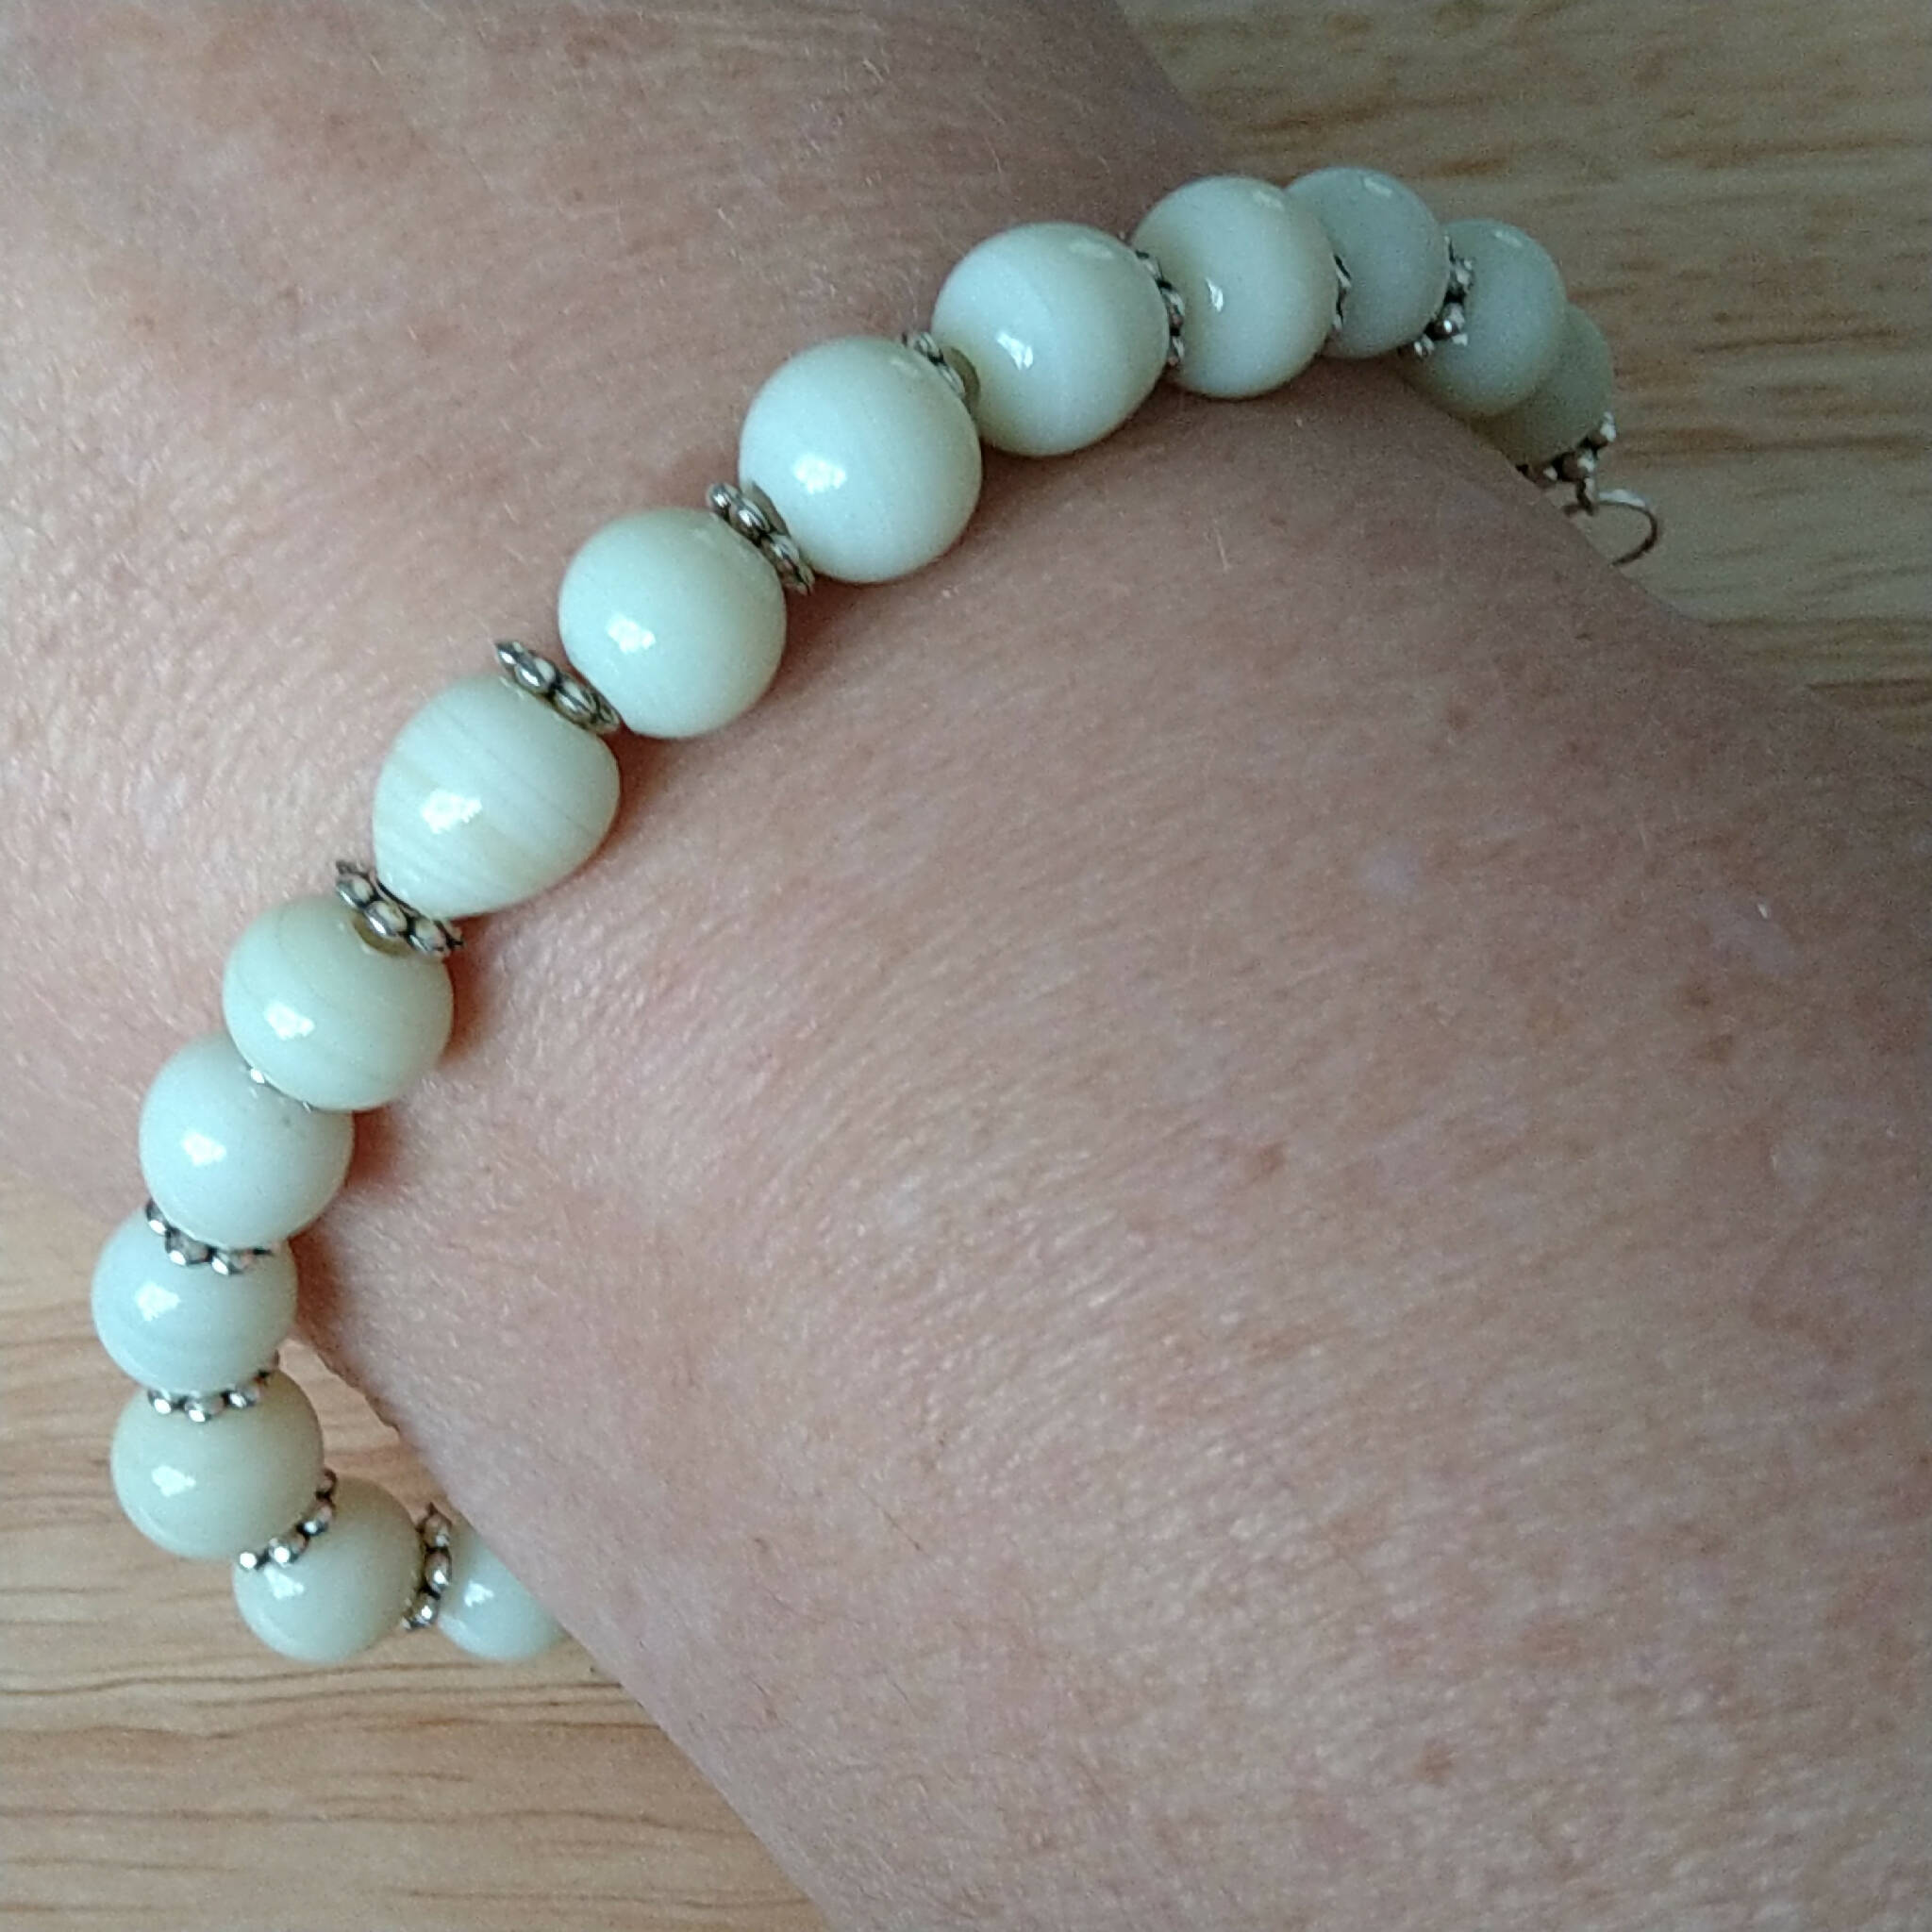 Cream coloured bracelet, handmade using recycled beads & silver coloured daisy spacers,17cm length